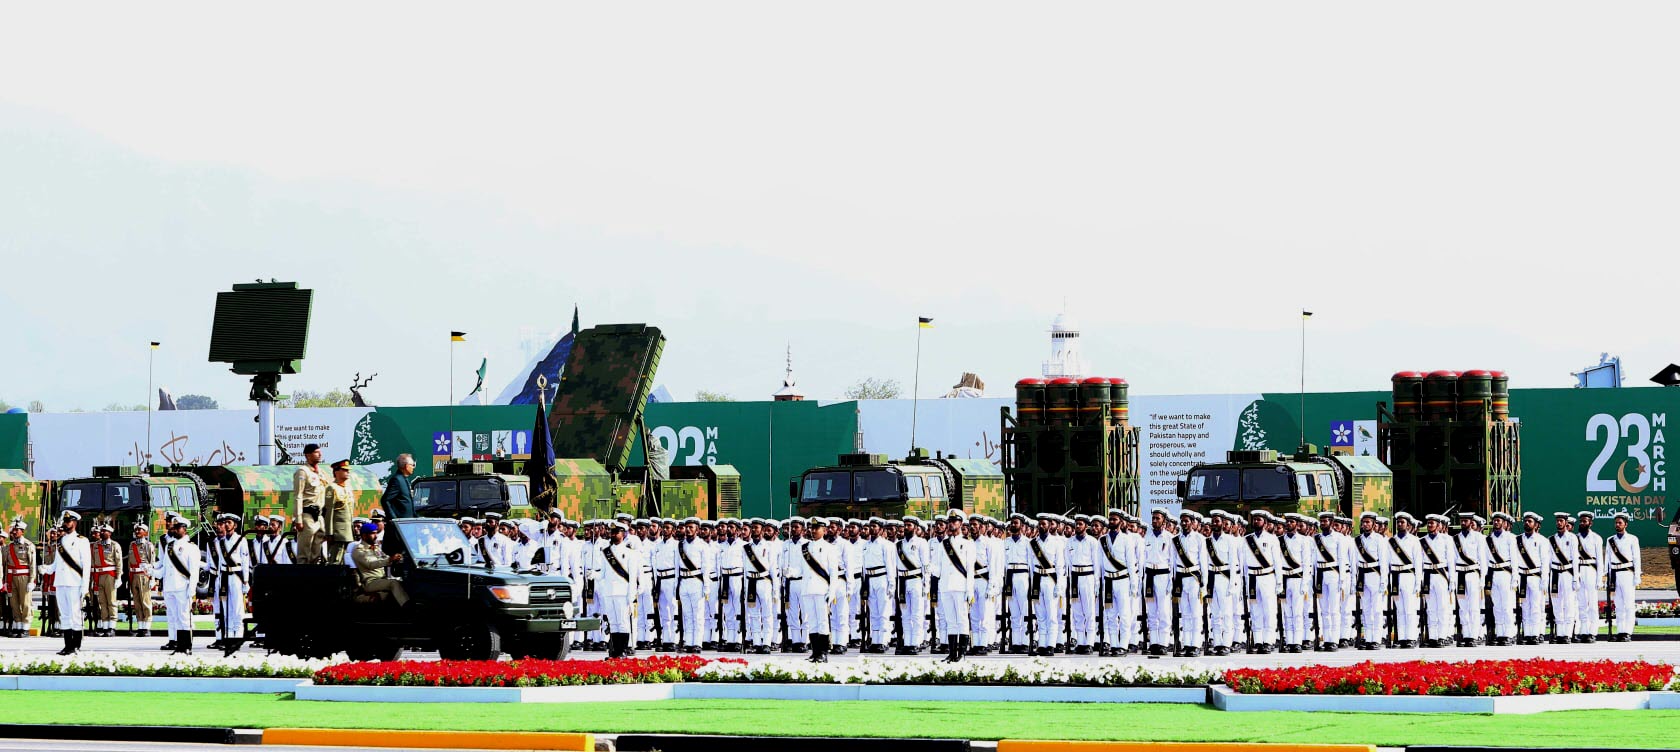 PAKISTAN ARMED FORCES Displays Full Military Might With The Display Of Lethal And Hi-Tech Weapons - Stealth Fighter Jets - Air Defense Systems And Combat Drones On PAKISTAN DAY Military Parade 2022